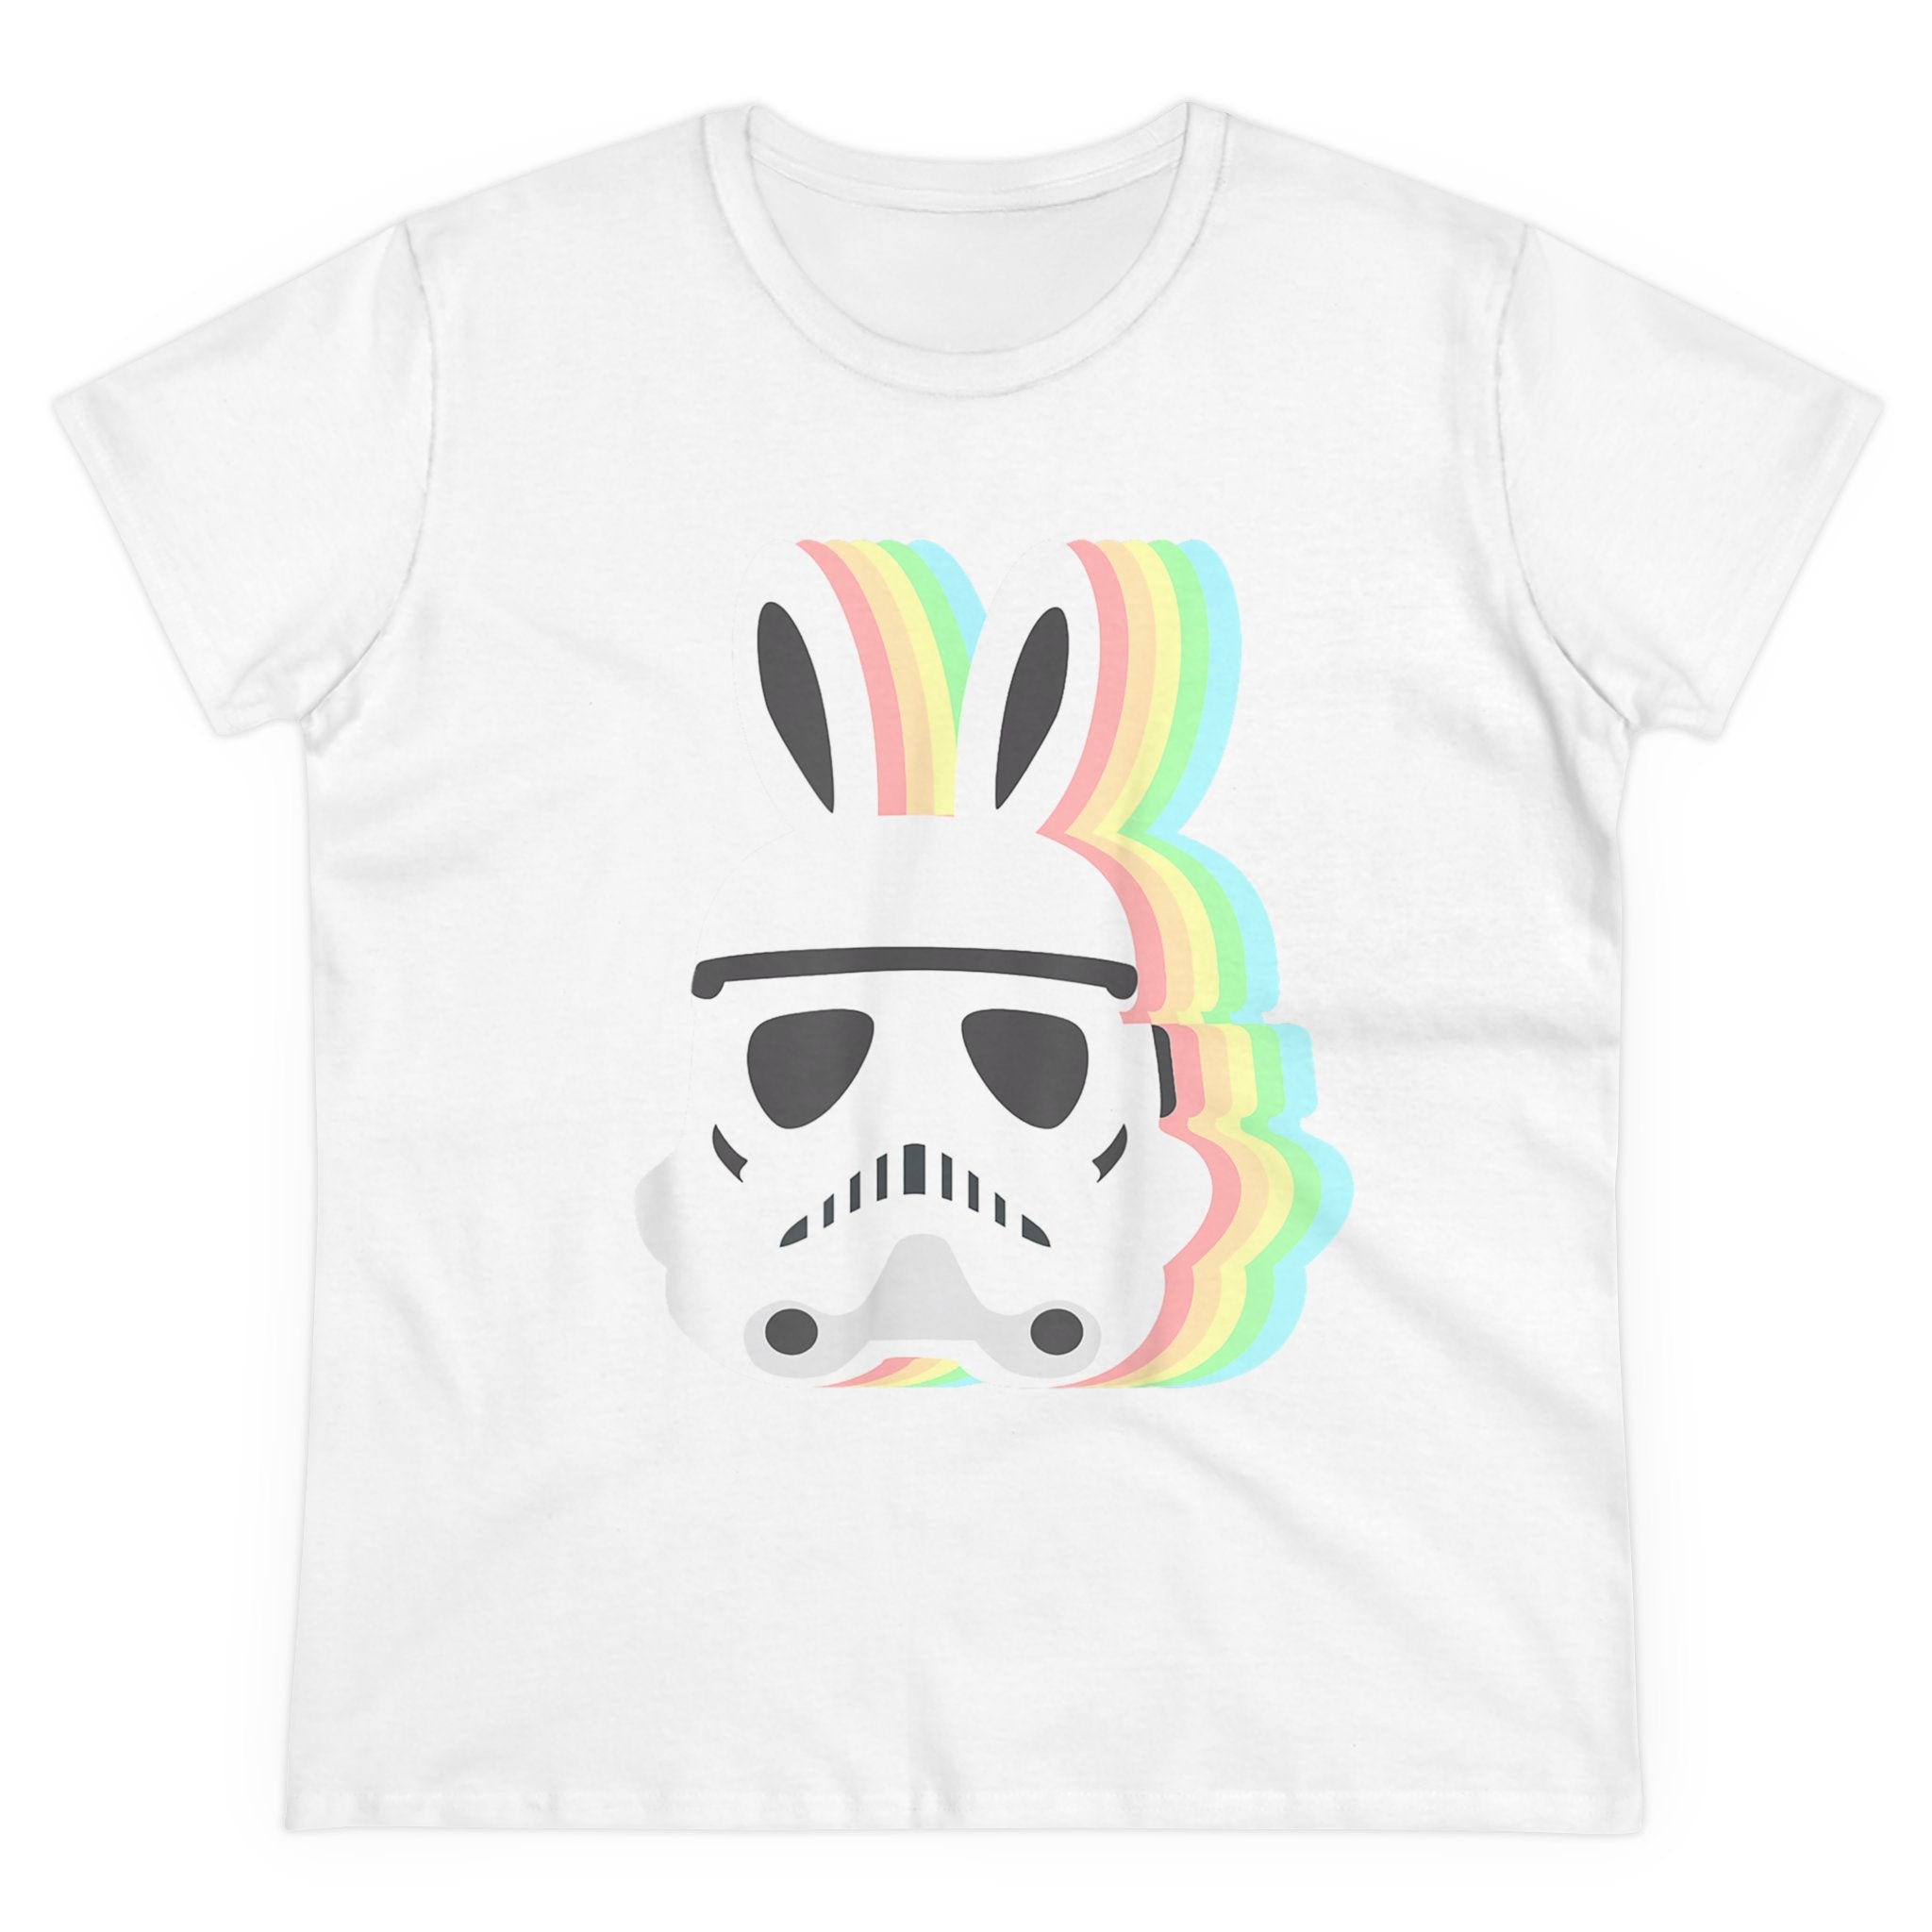 The Star Wars Easter Stormtrooper - Women's Tee is a white T-shirt featuring a graphic of a stormtrooper helmet with colorful rainbow bunny ears, perfect for fans seeking comfort and style.